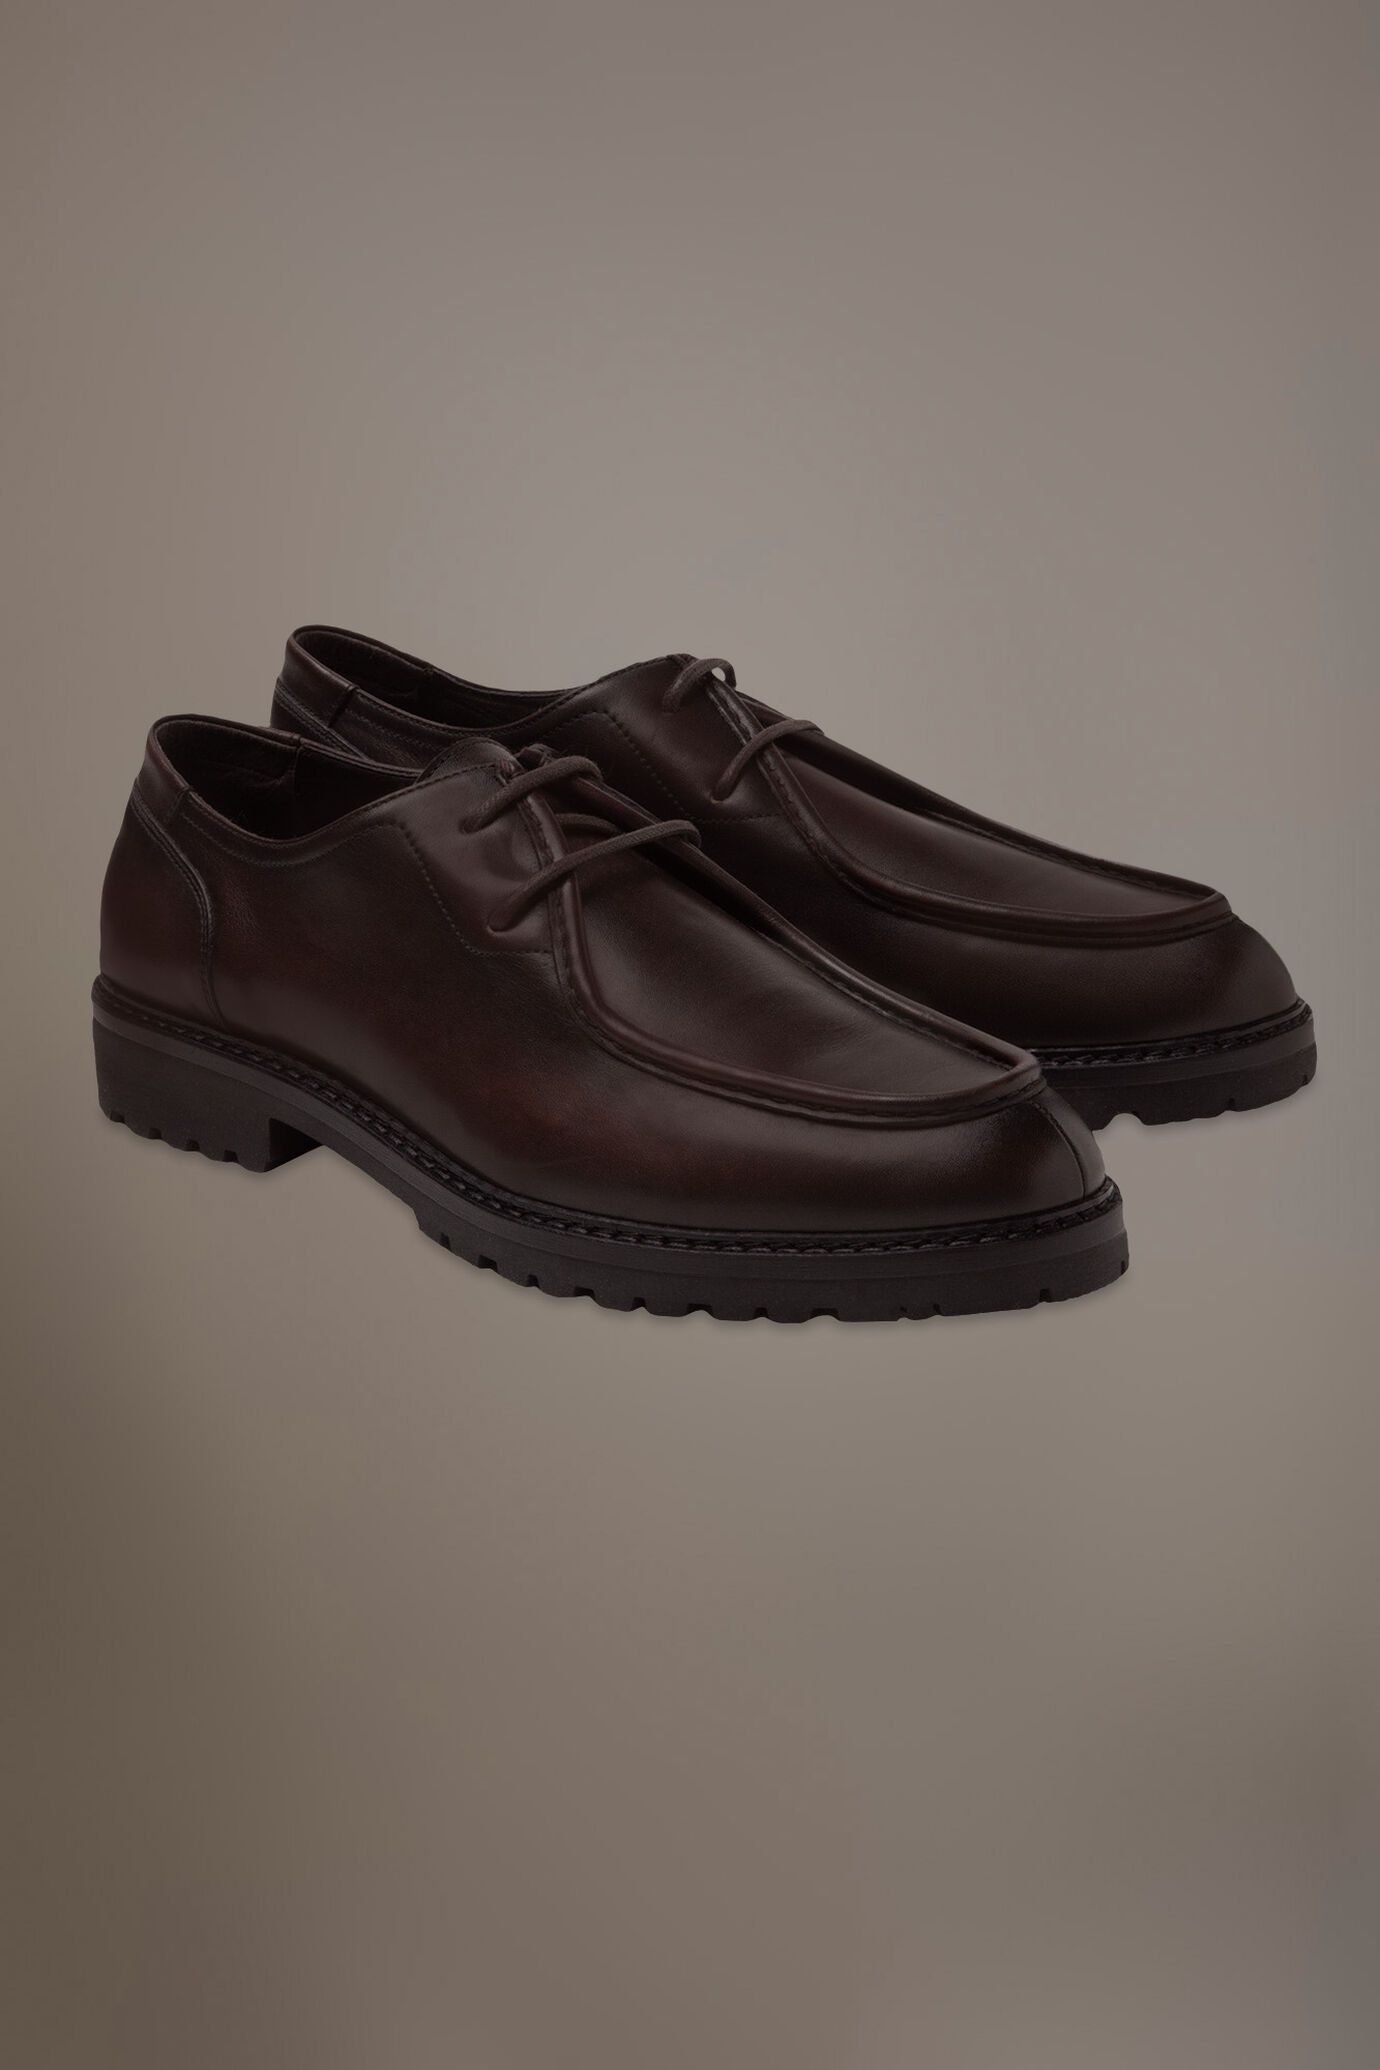 Ranger shoes - 100% leather